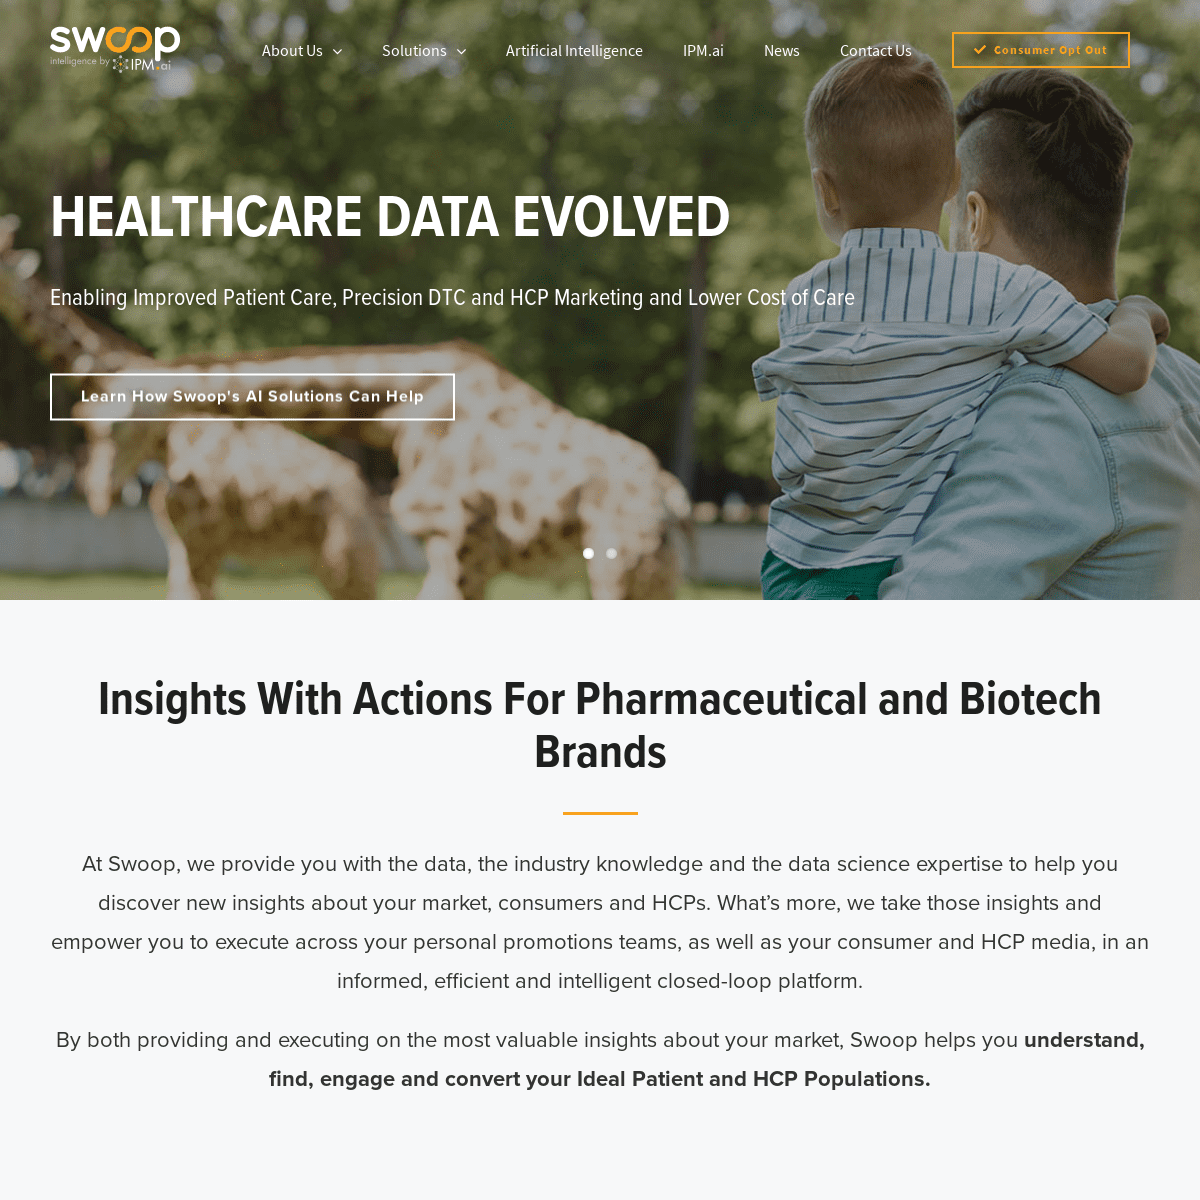 Swoop – Healthcare Data Solutions to Find, Engage and Convert Your Ideal Population